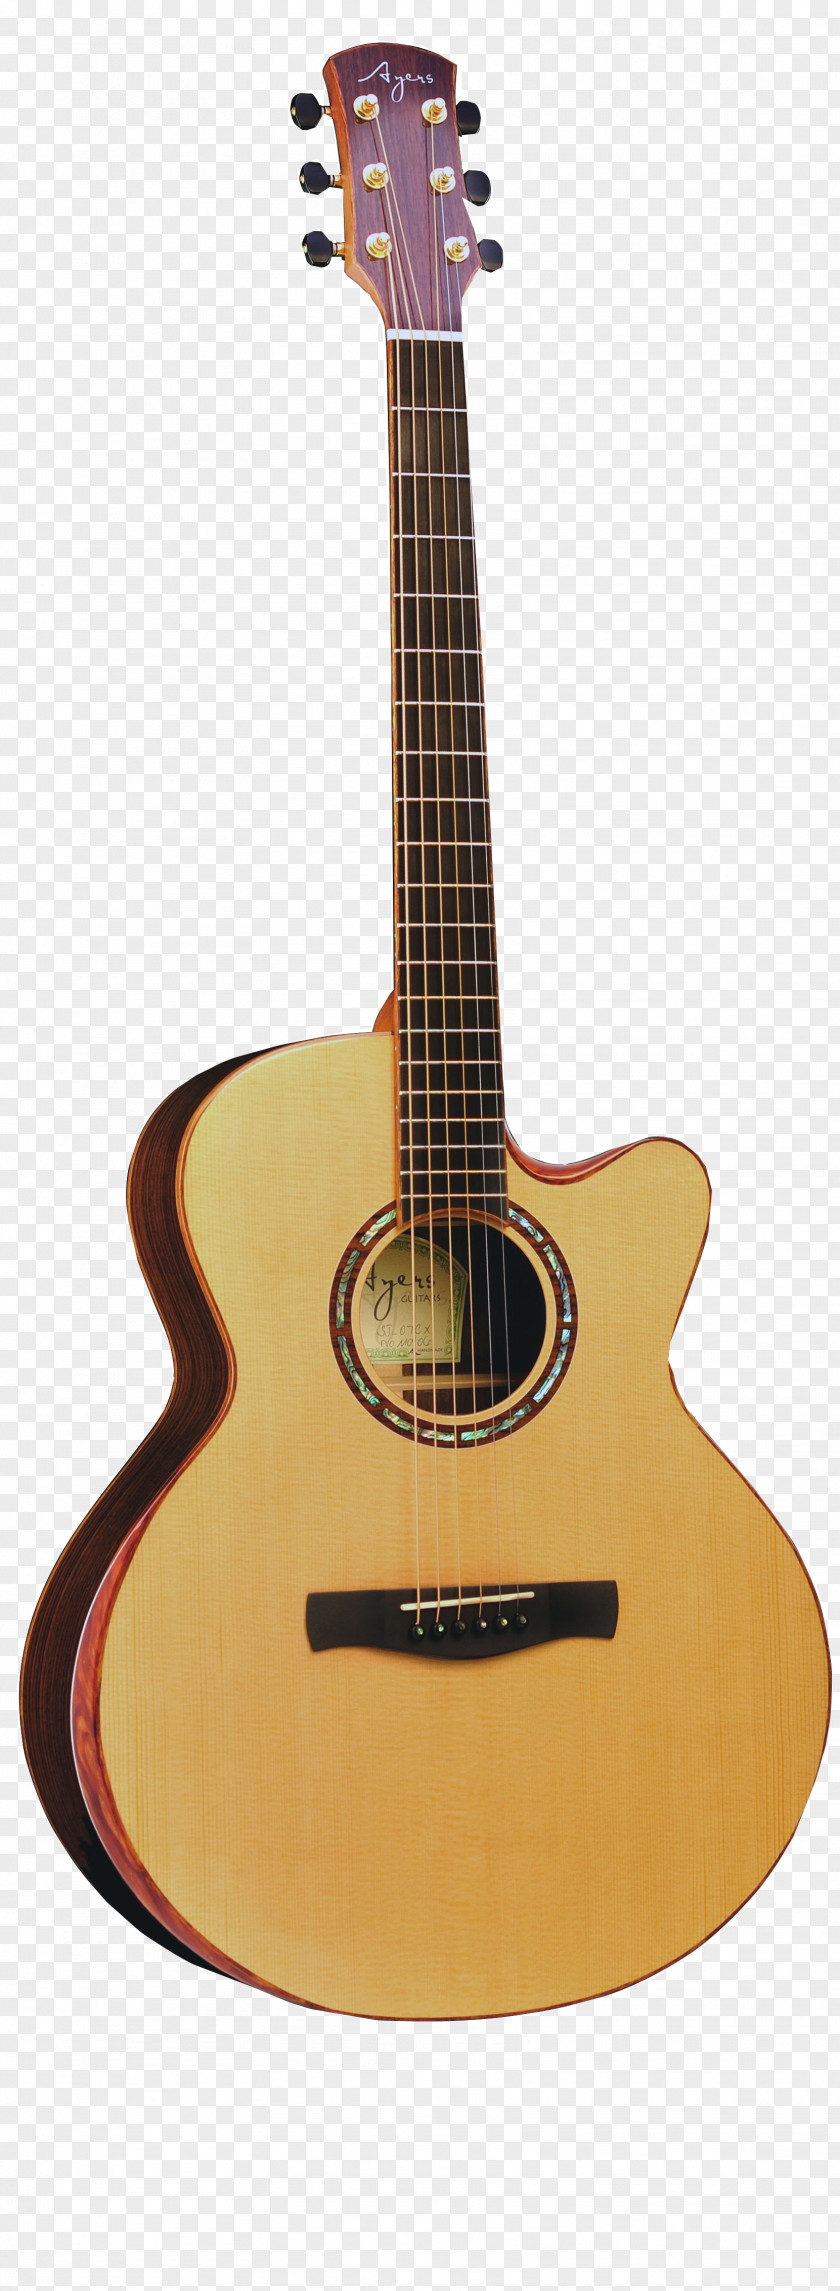 Handmade Japanese Instruments Acoustic-electric Guitar Fender Musical Corporation Dreadnought Acoustic PNG